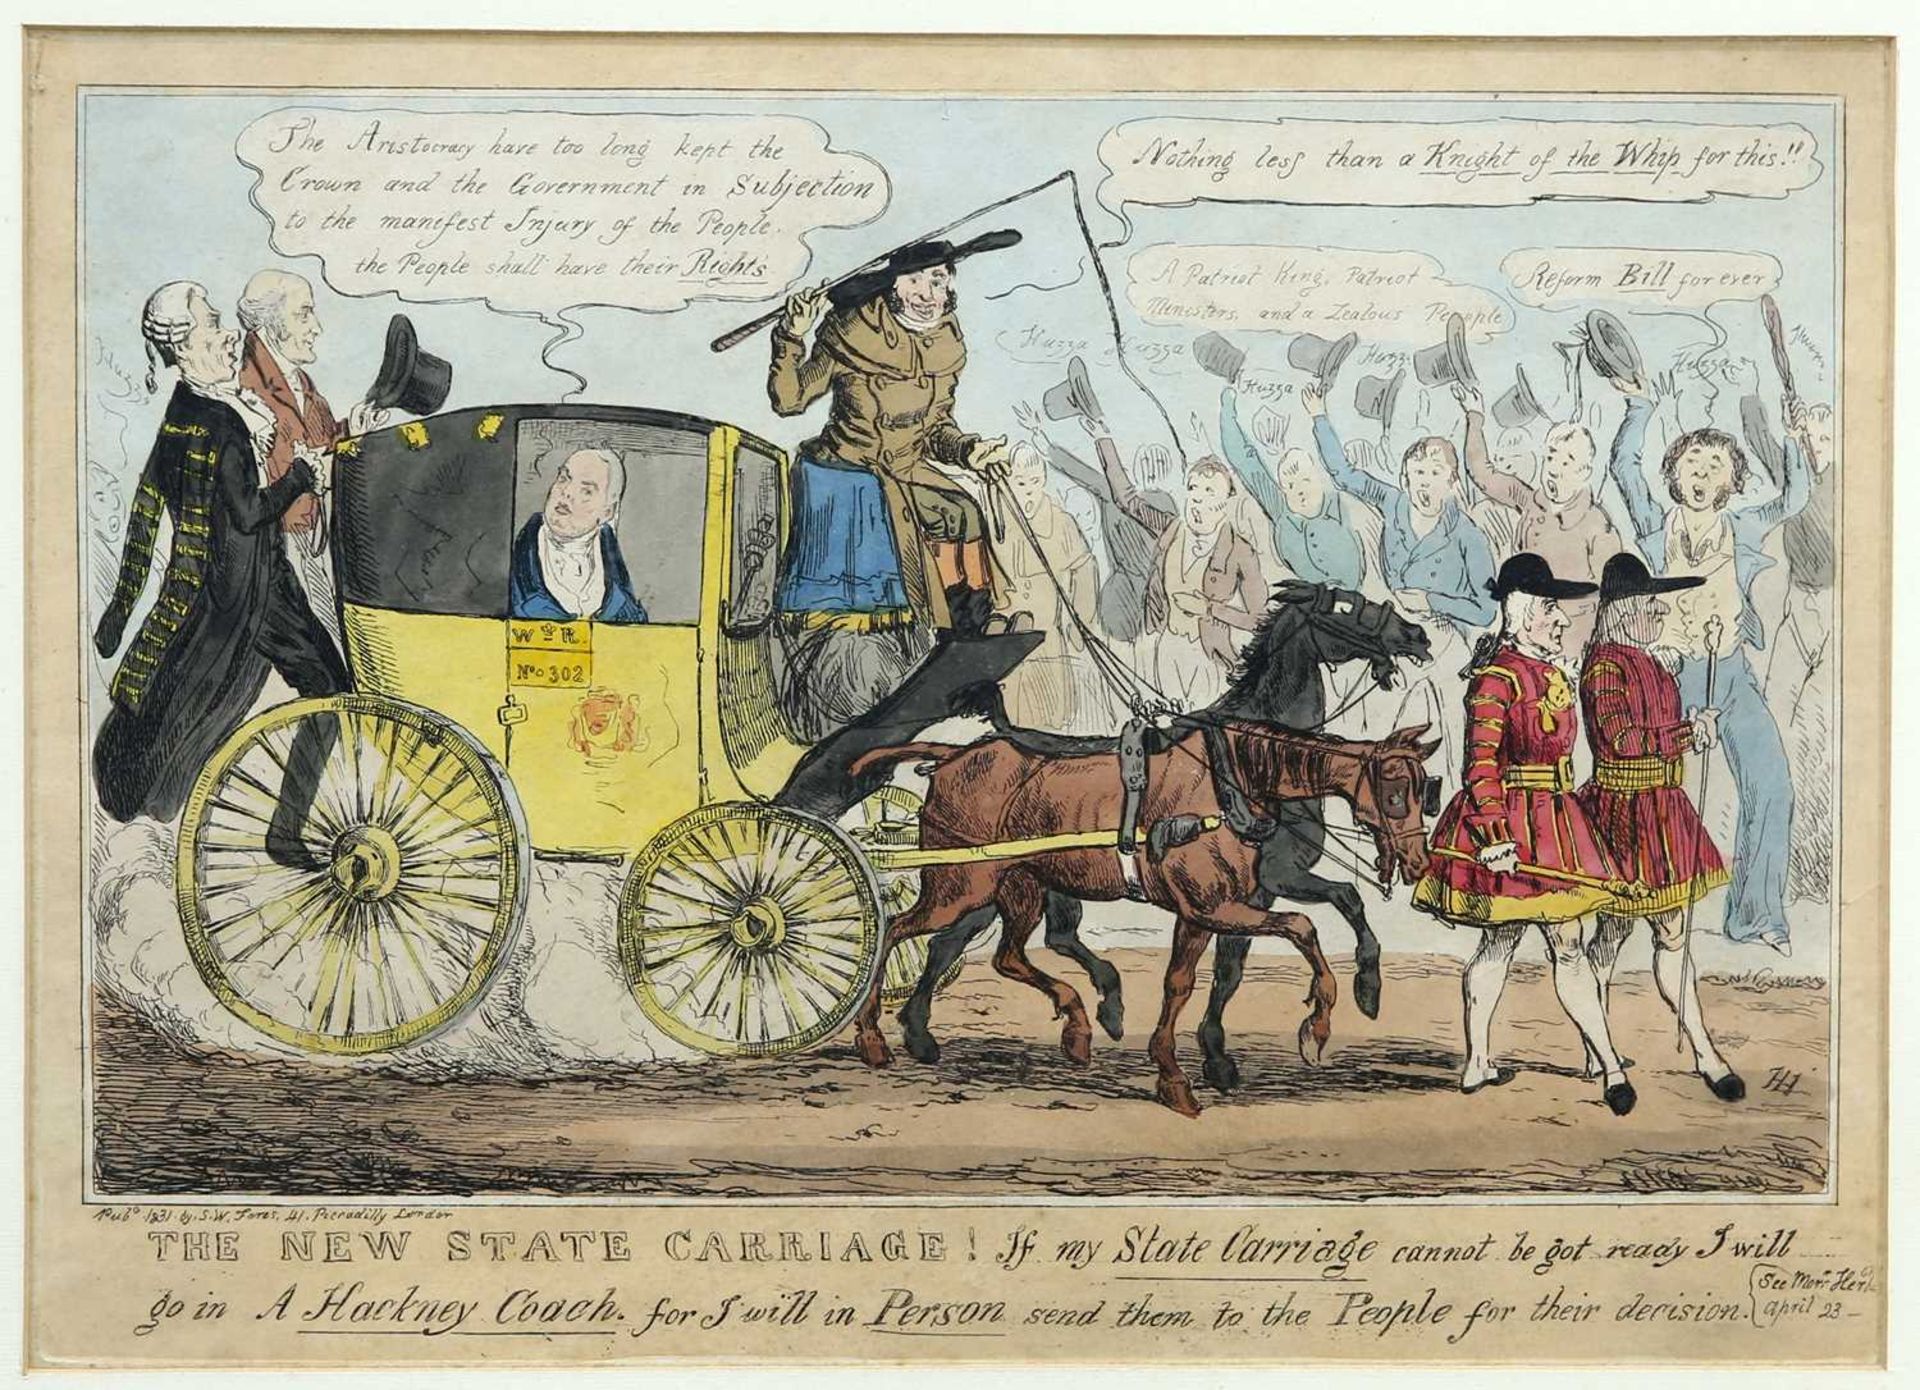 AFTER HENRY HEATH (1801-1858) THE NEW STATE CARRIAGE!